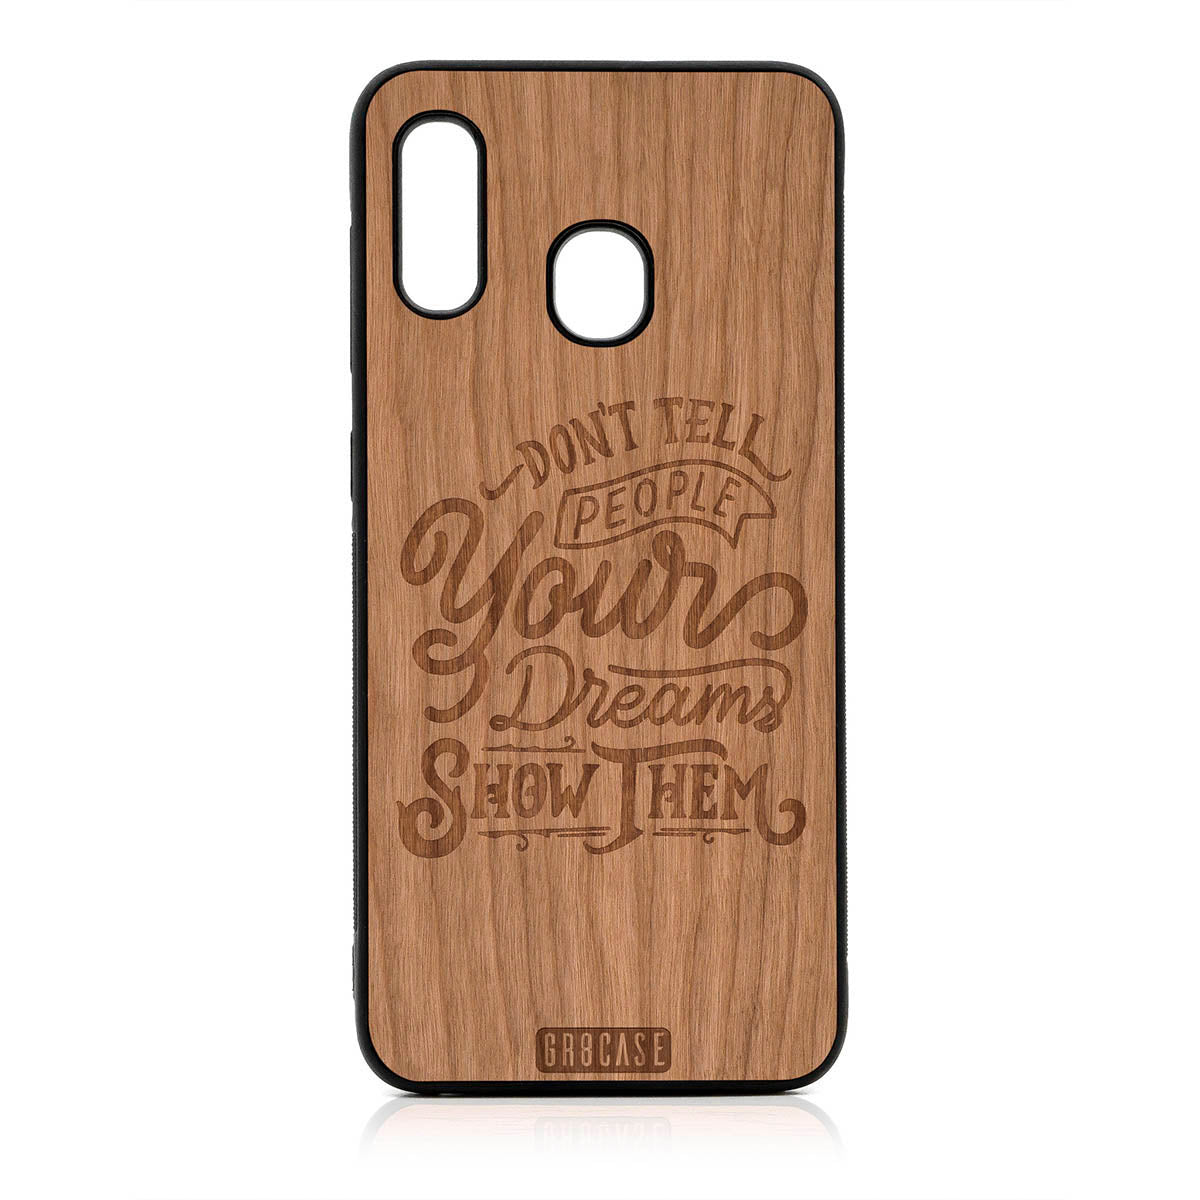 Don't Tell People Your Dreams Show Them Design Wood Case For Samsung Galaxy A20 by GR8CASE